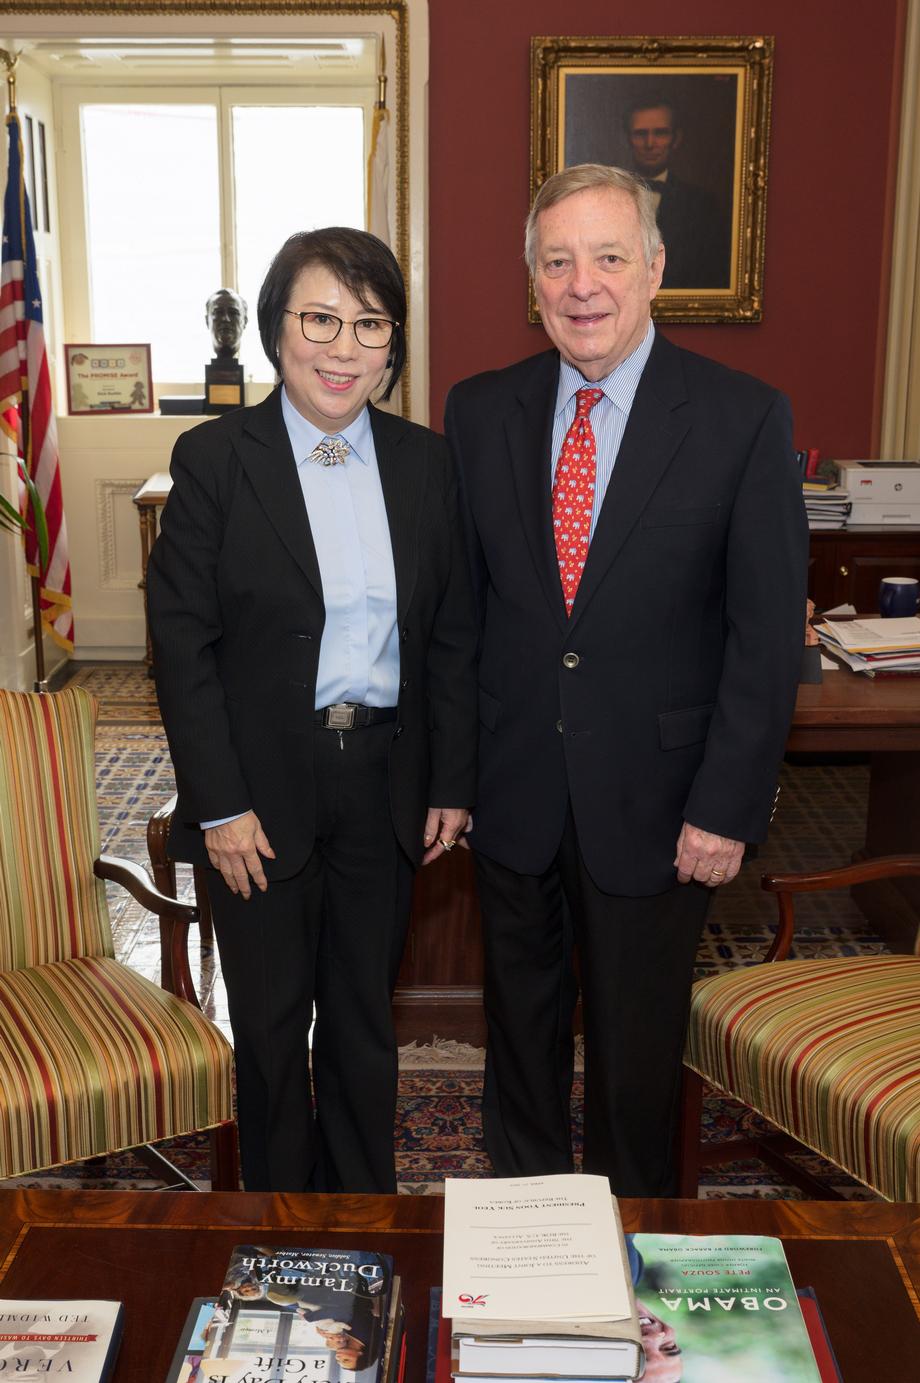 DURBIN STATEMENT FOLLOWING THE JOINT SESSION OF CONGRESS WITH SOUTH KOREAN PRESIDENT YOON SUK YEOL